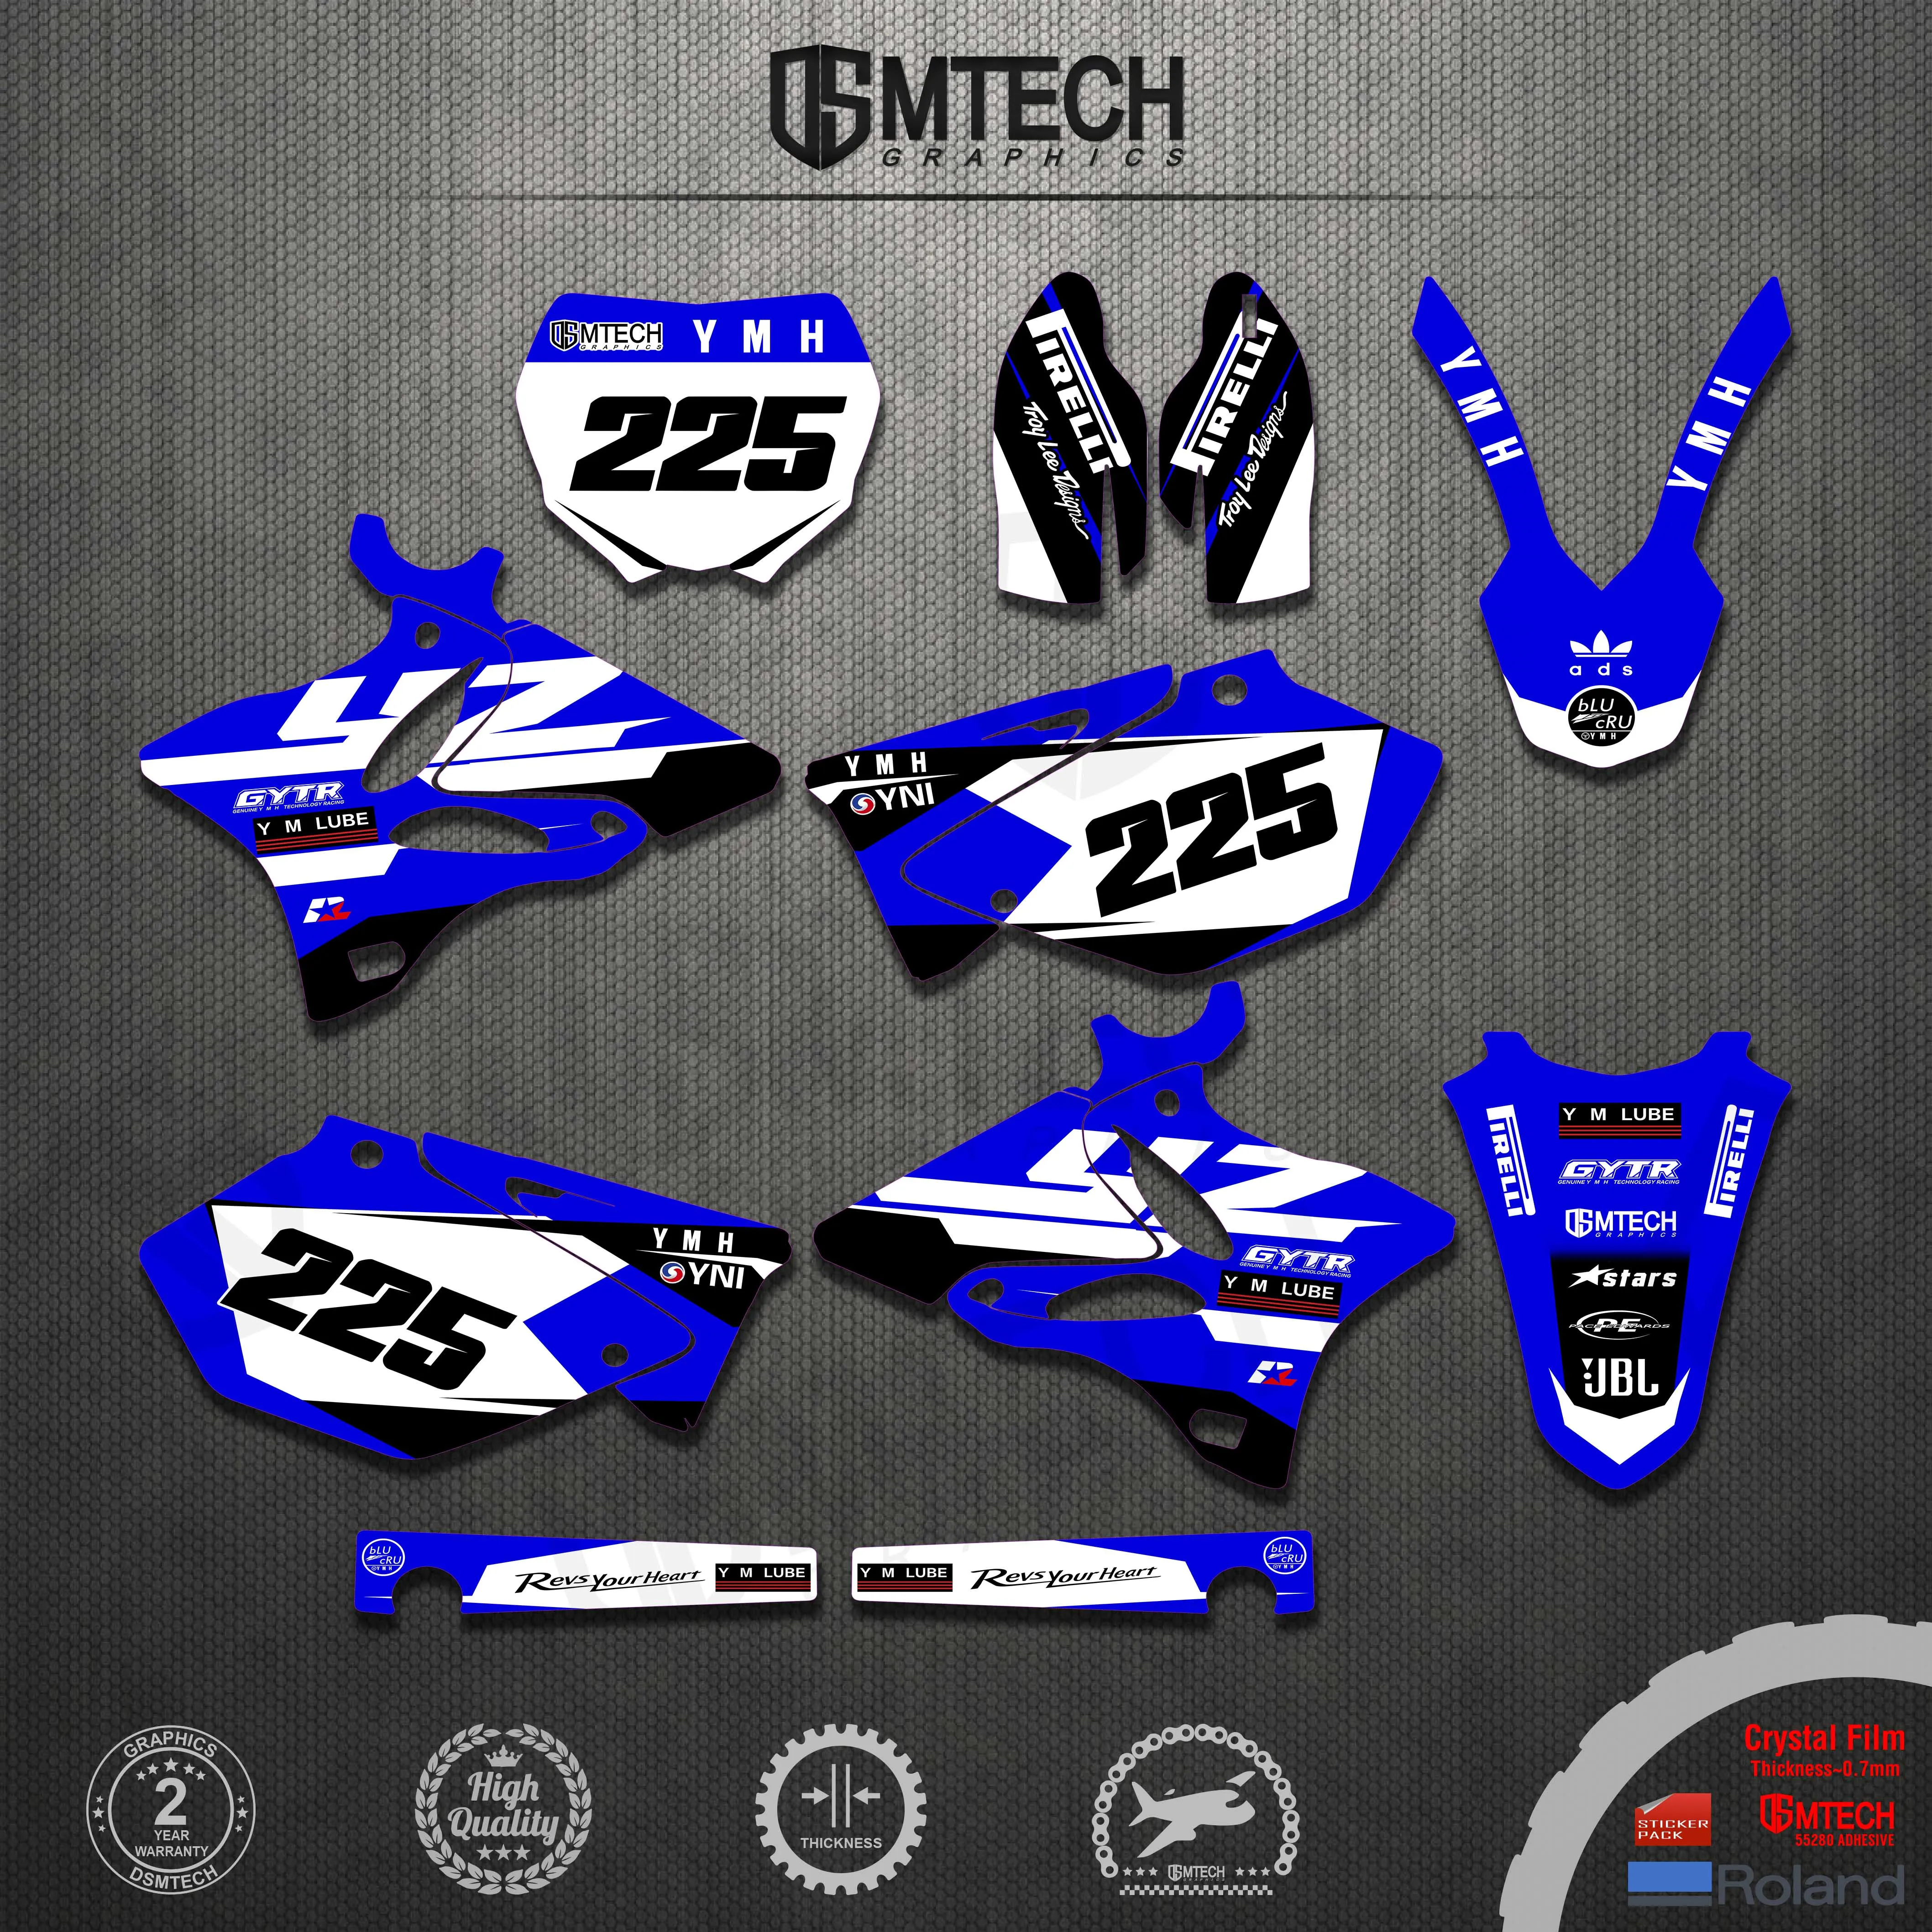 DSMTECH Stickers Decals Graphics kits For YAMAHA YZ125 YZ250 2002- 2005 2006 2007 2008 2009 2010 2011 2012 2013 2014 YZ 250 luckmoto stickers decals graphics kits for yamaha yz125 yz250 2002 2005 2006 2007 2008 2009 2010 2011 2012 2013 2014 yz 250